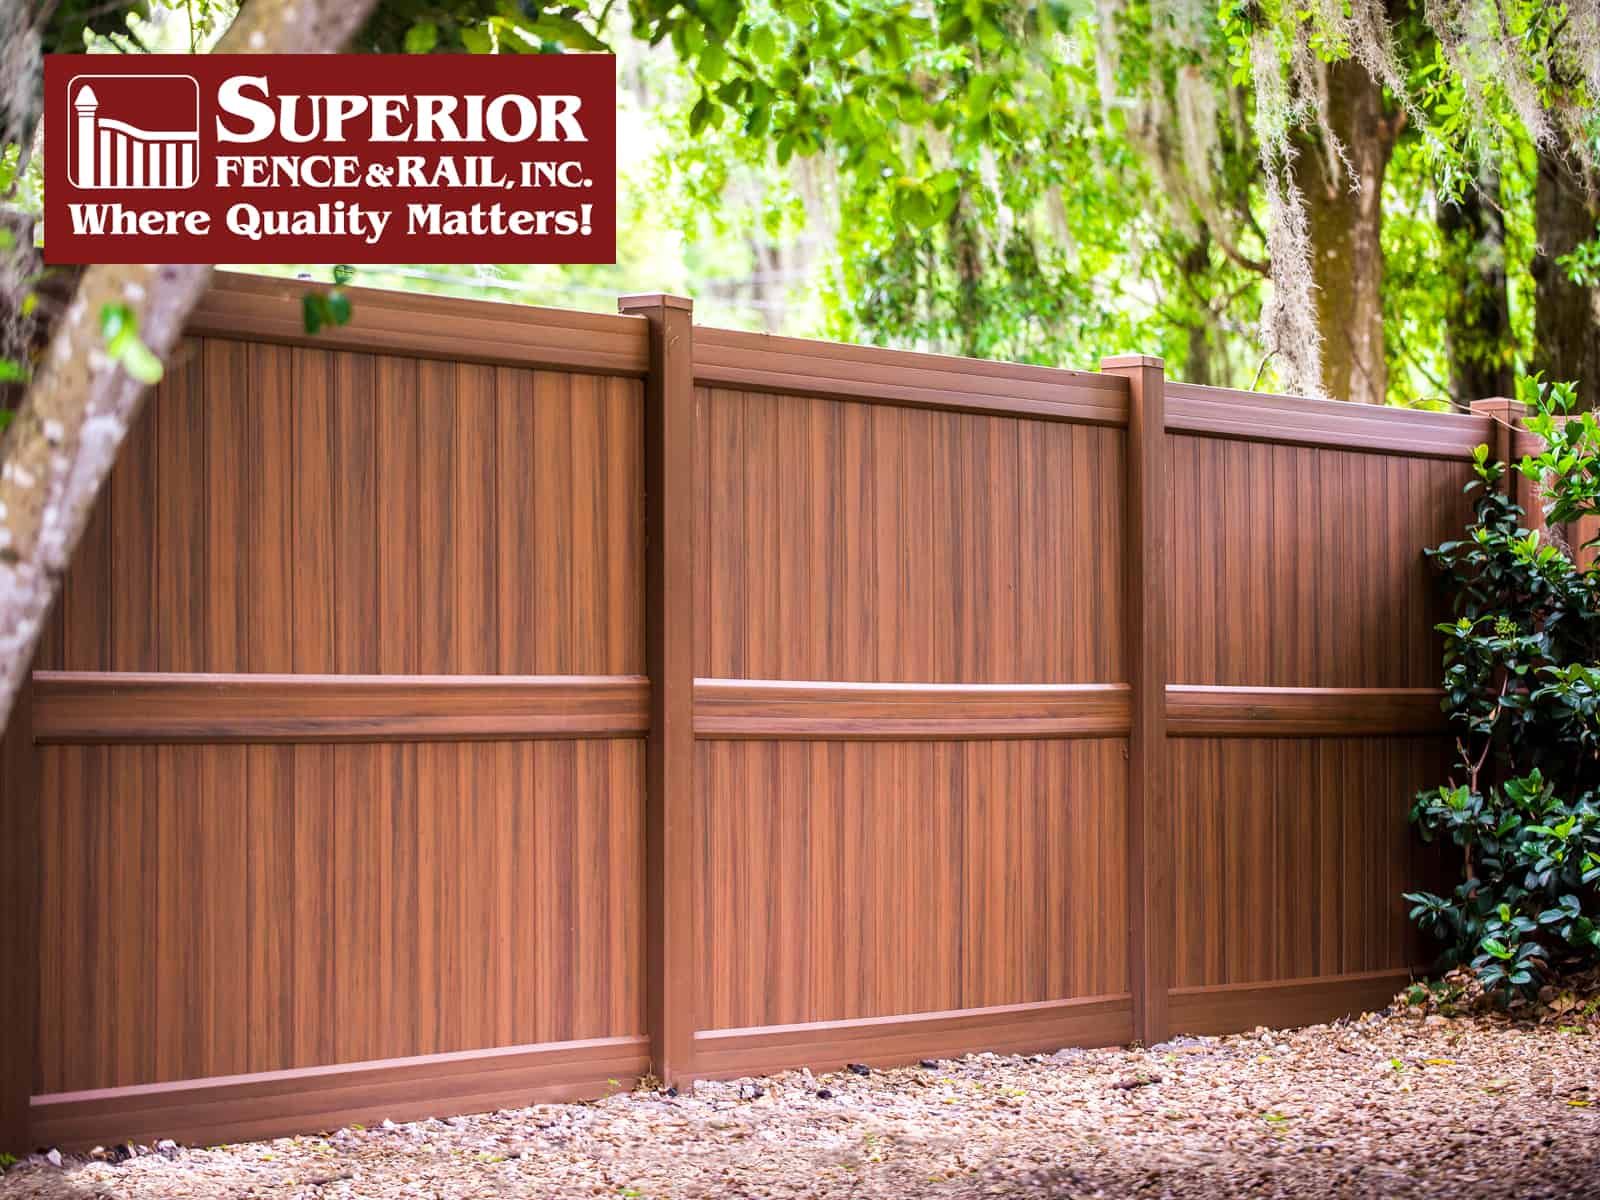 Northville Fence Company Contractor